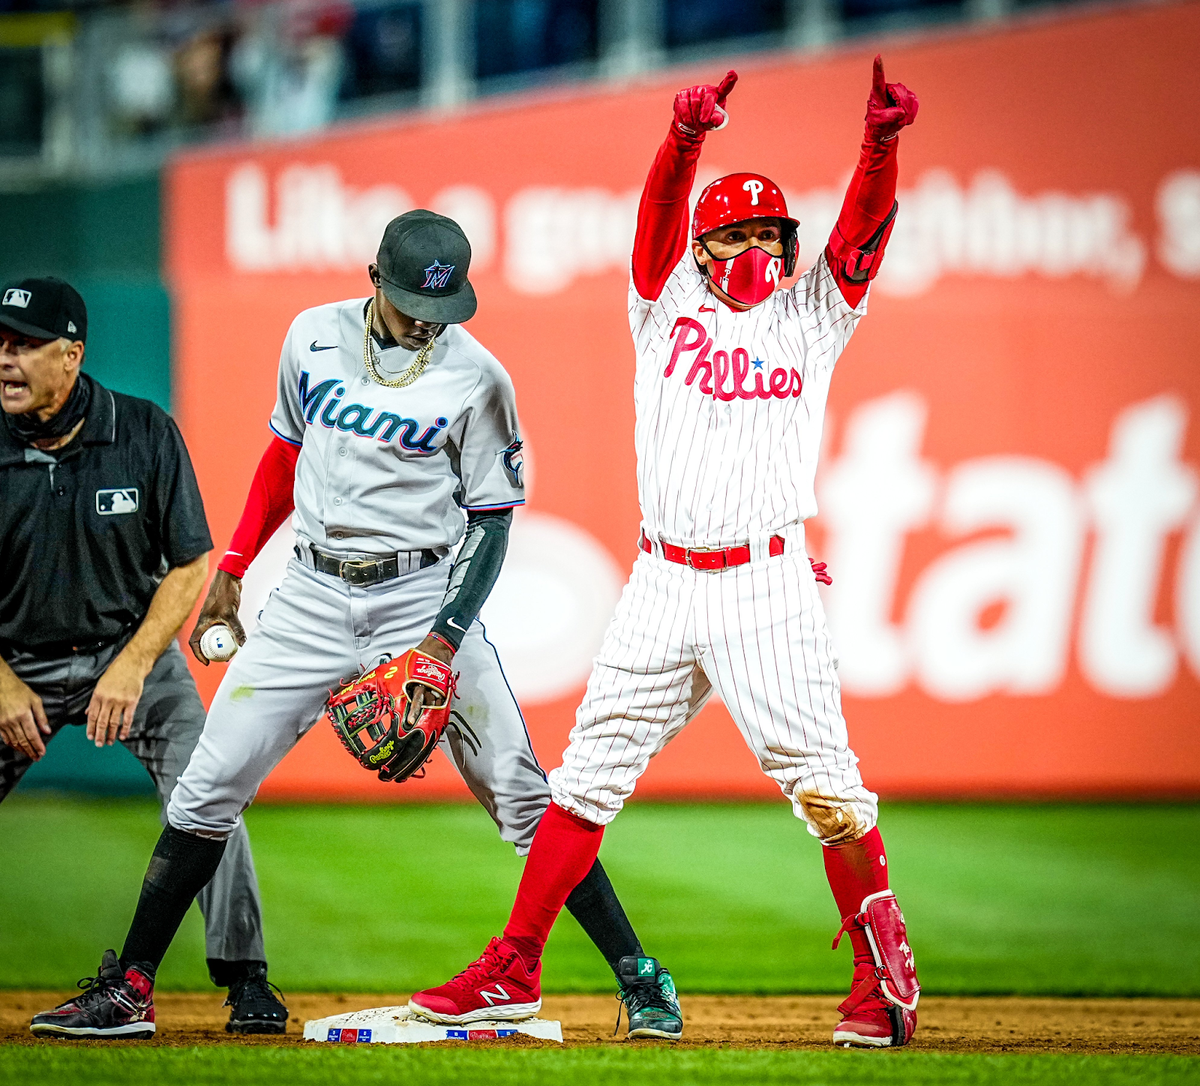 Philadelphia: Series tied after Phillies lose to Marlins 